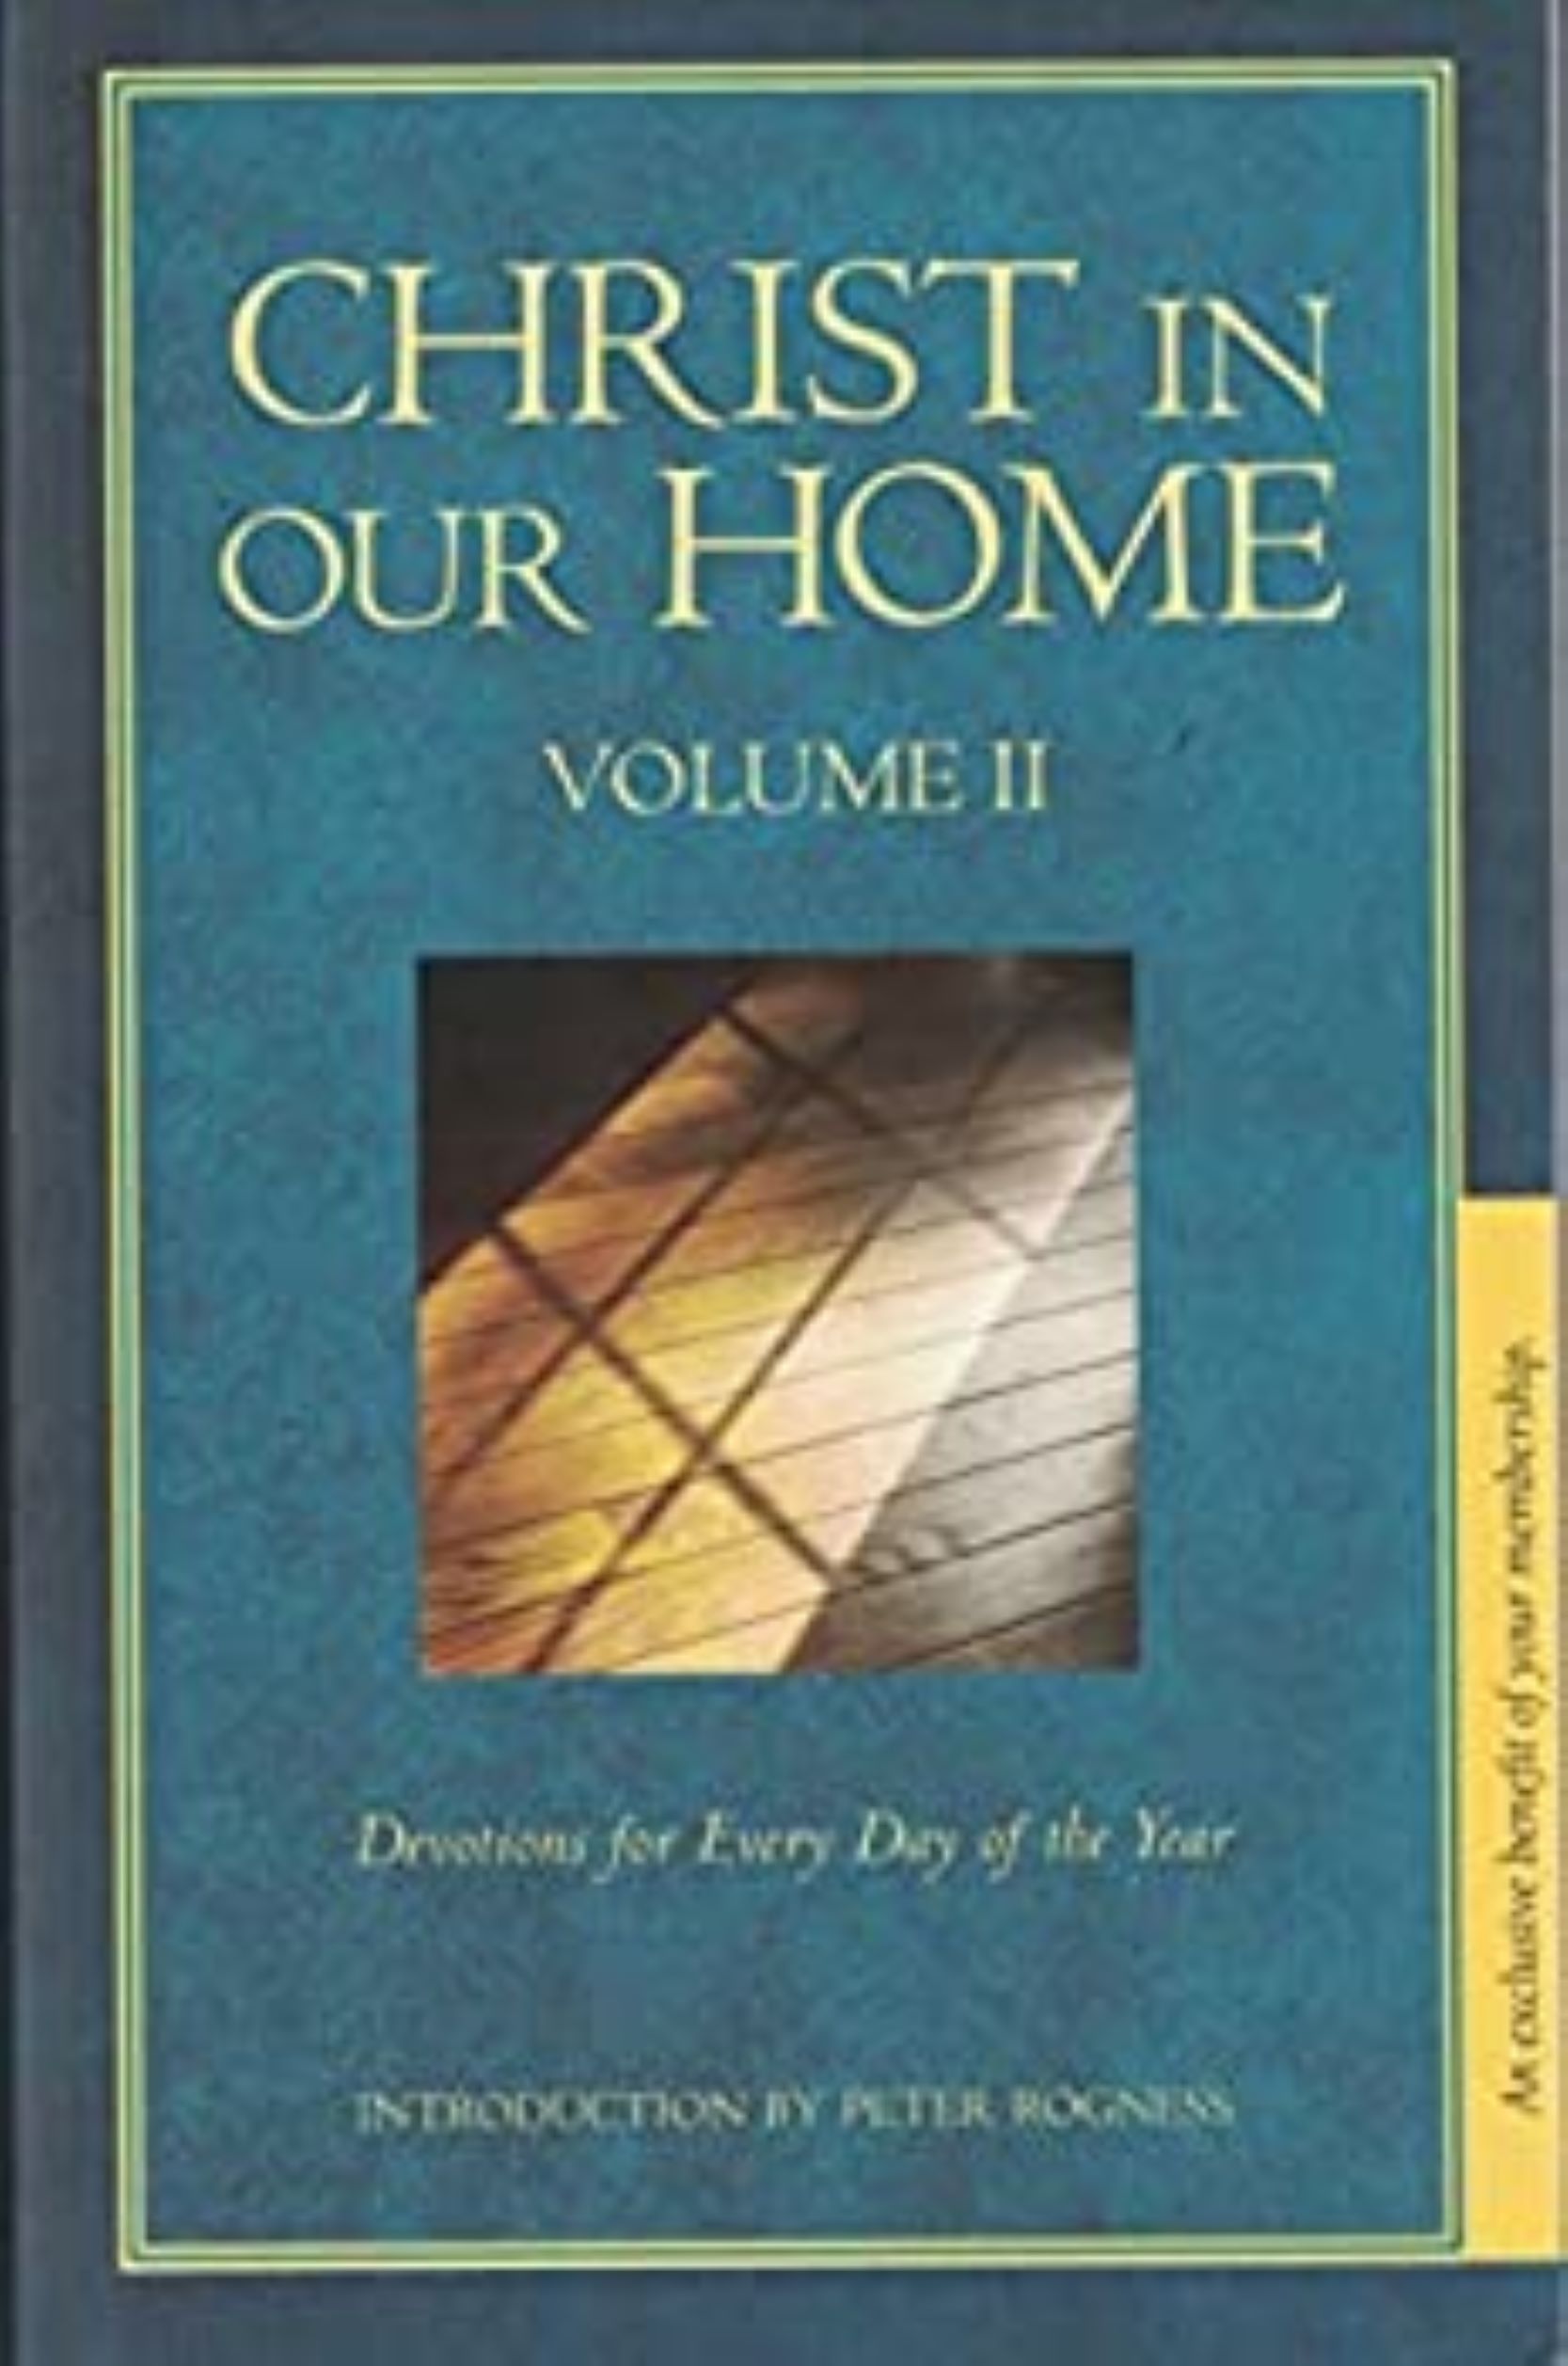 Christ in Our Home Vol. II